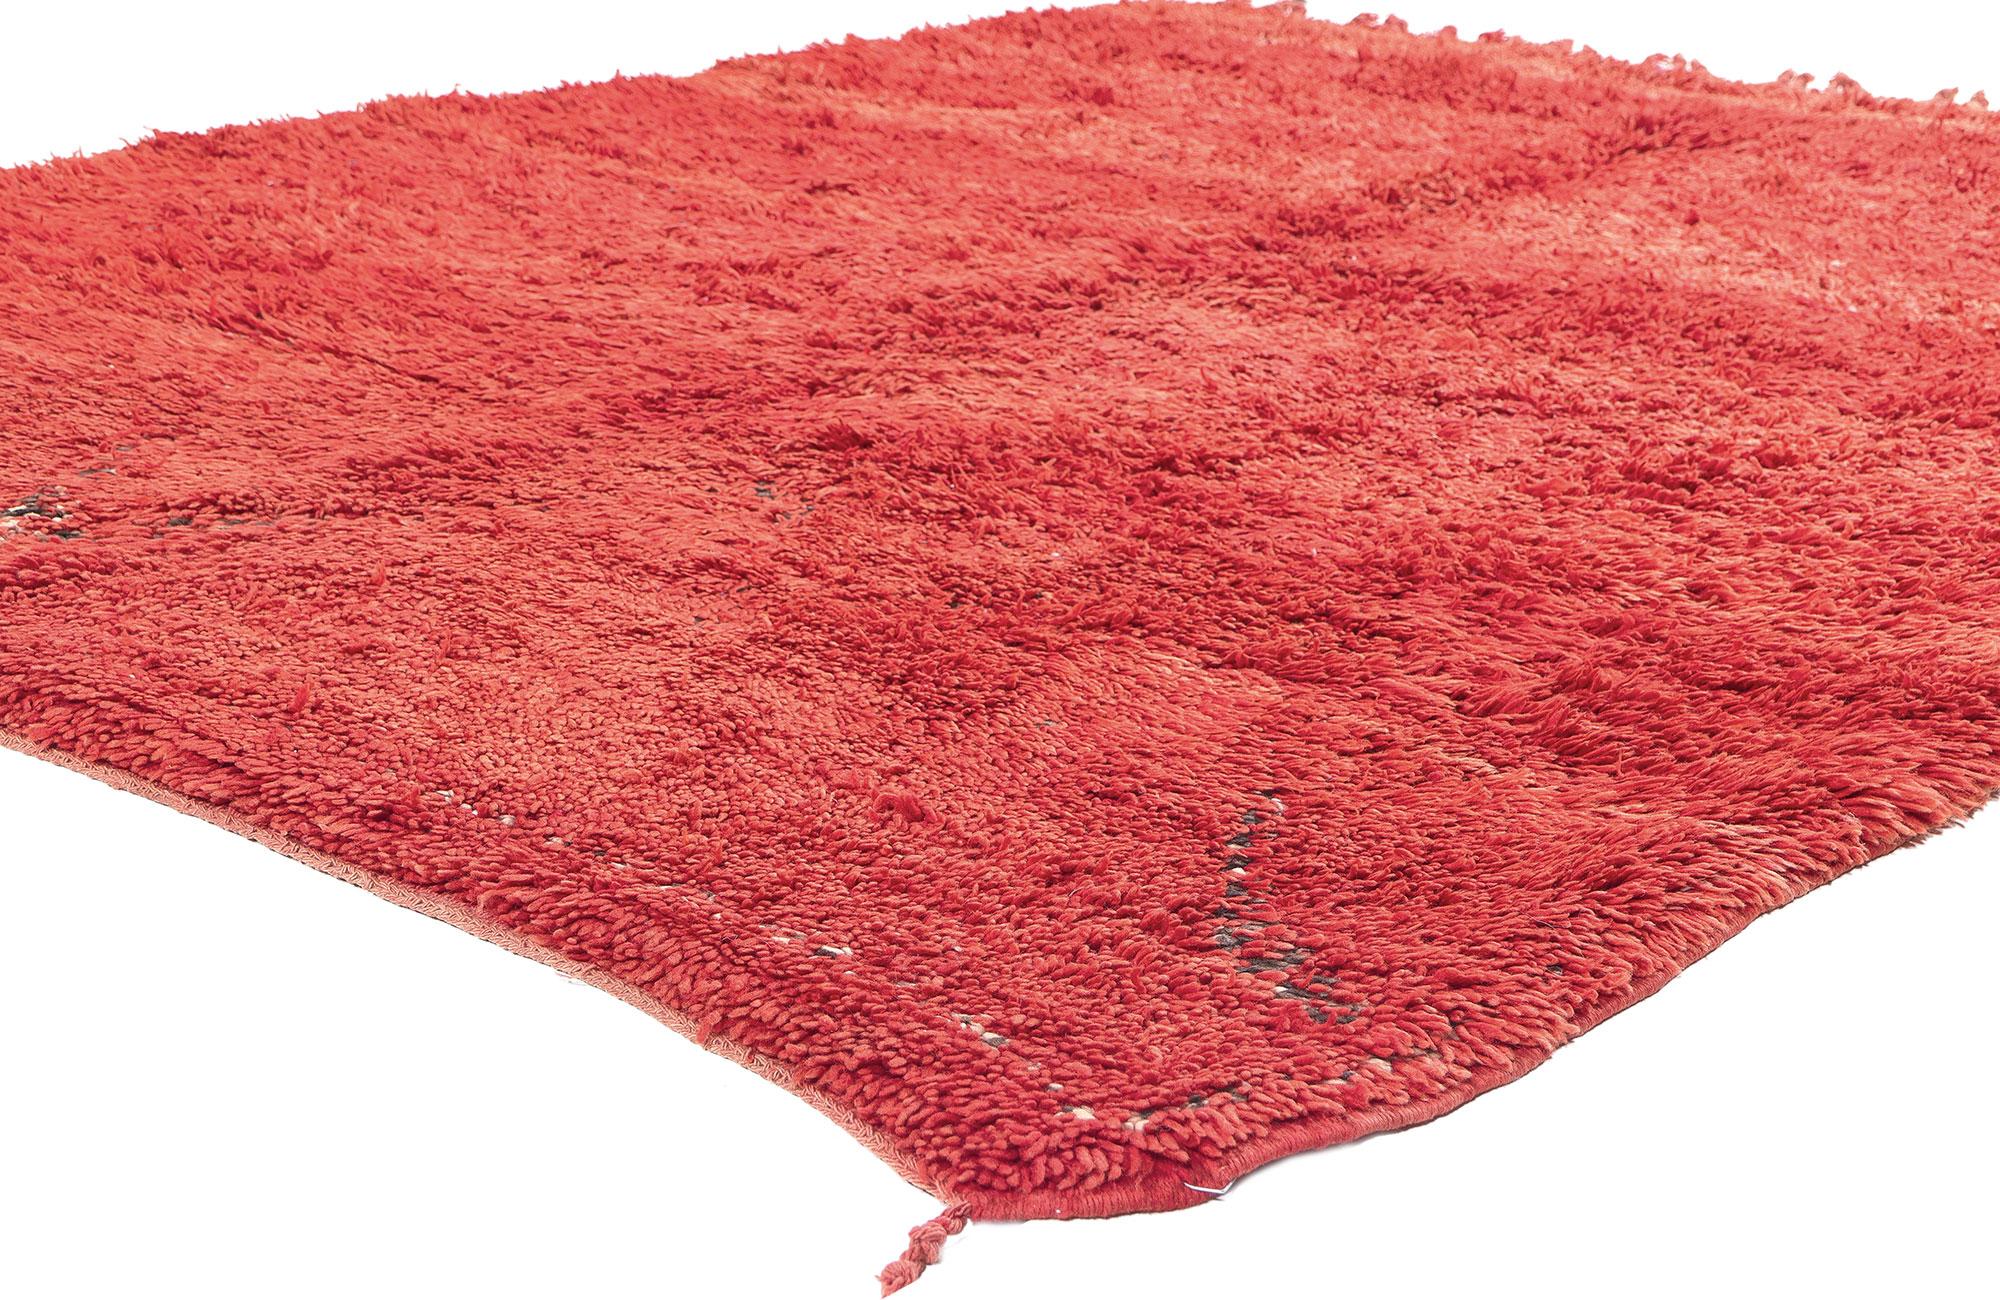 Moroccan Vintage Red Beni MGuild Rug with Hidden Pattern, Midcentury Meets Cozy Nomad For Sale